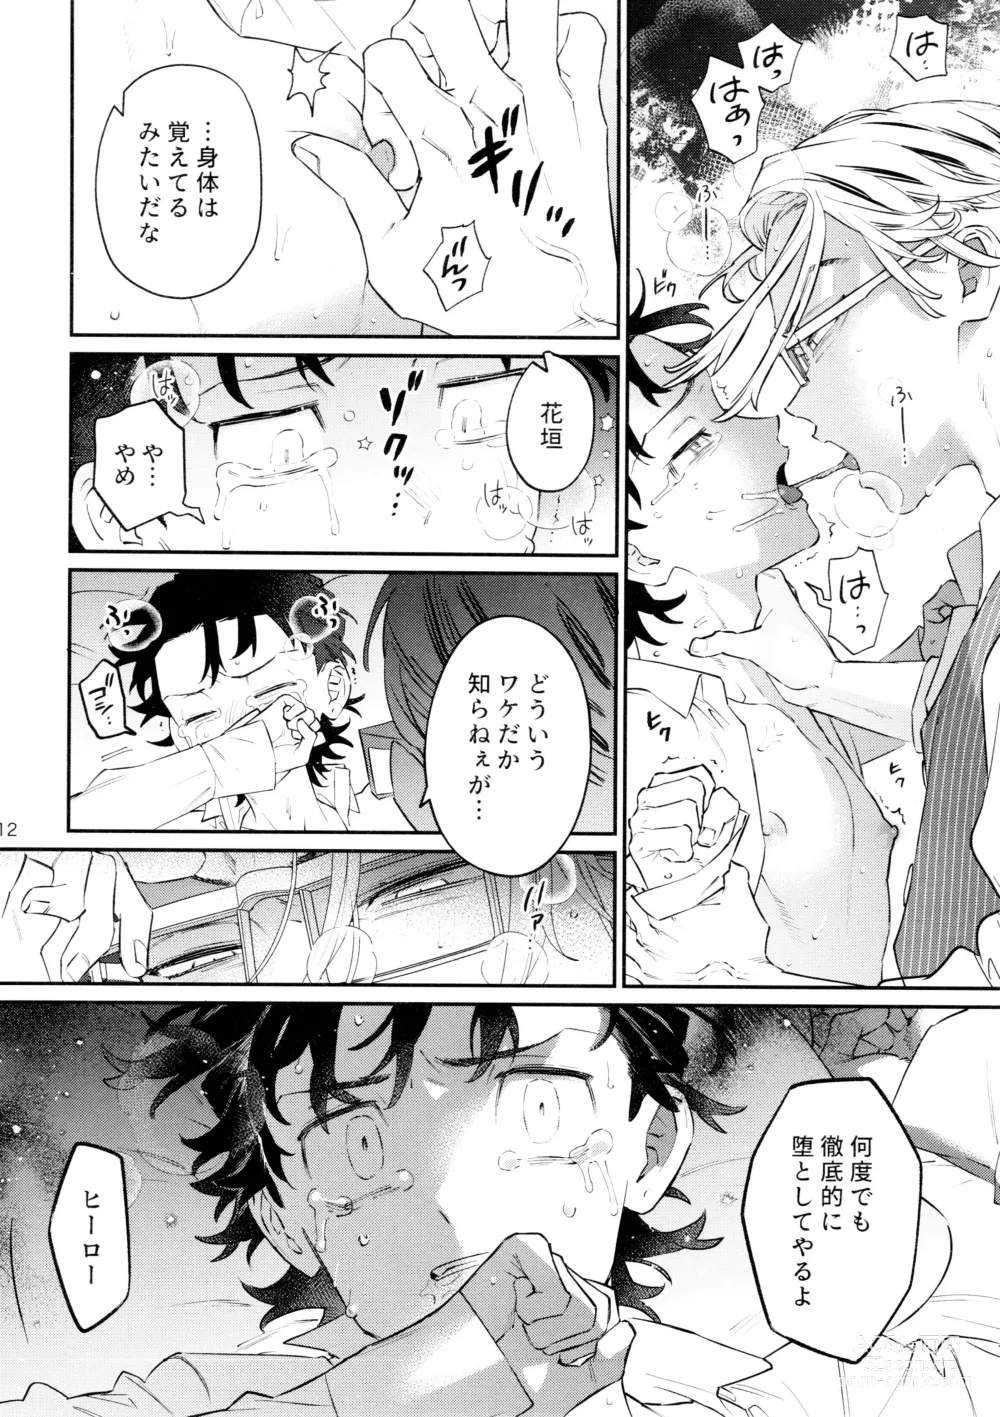 Page 12 of doujinshi ROOSTER